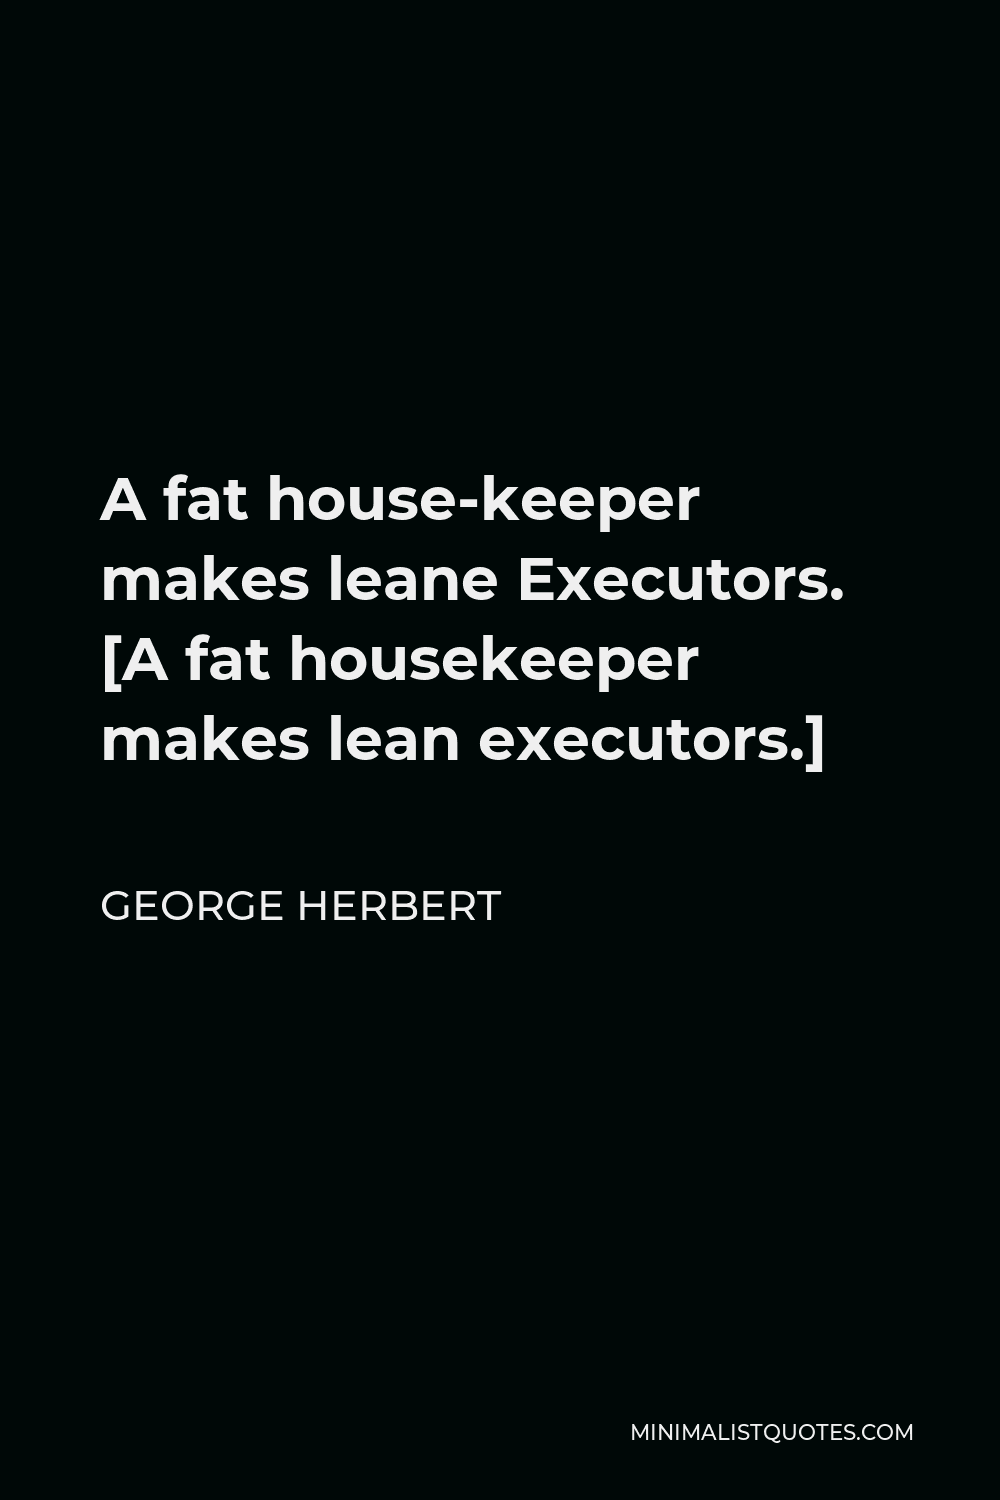 George Herbert Quote - A fat house-keeper makes leane Executors. [A fat housekeeper makes lean executors.]